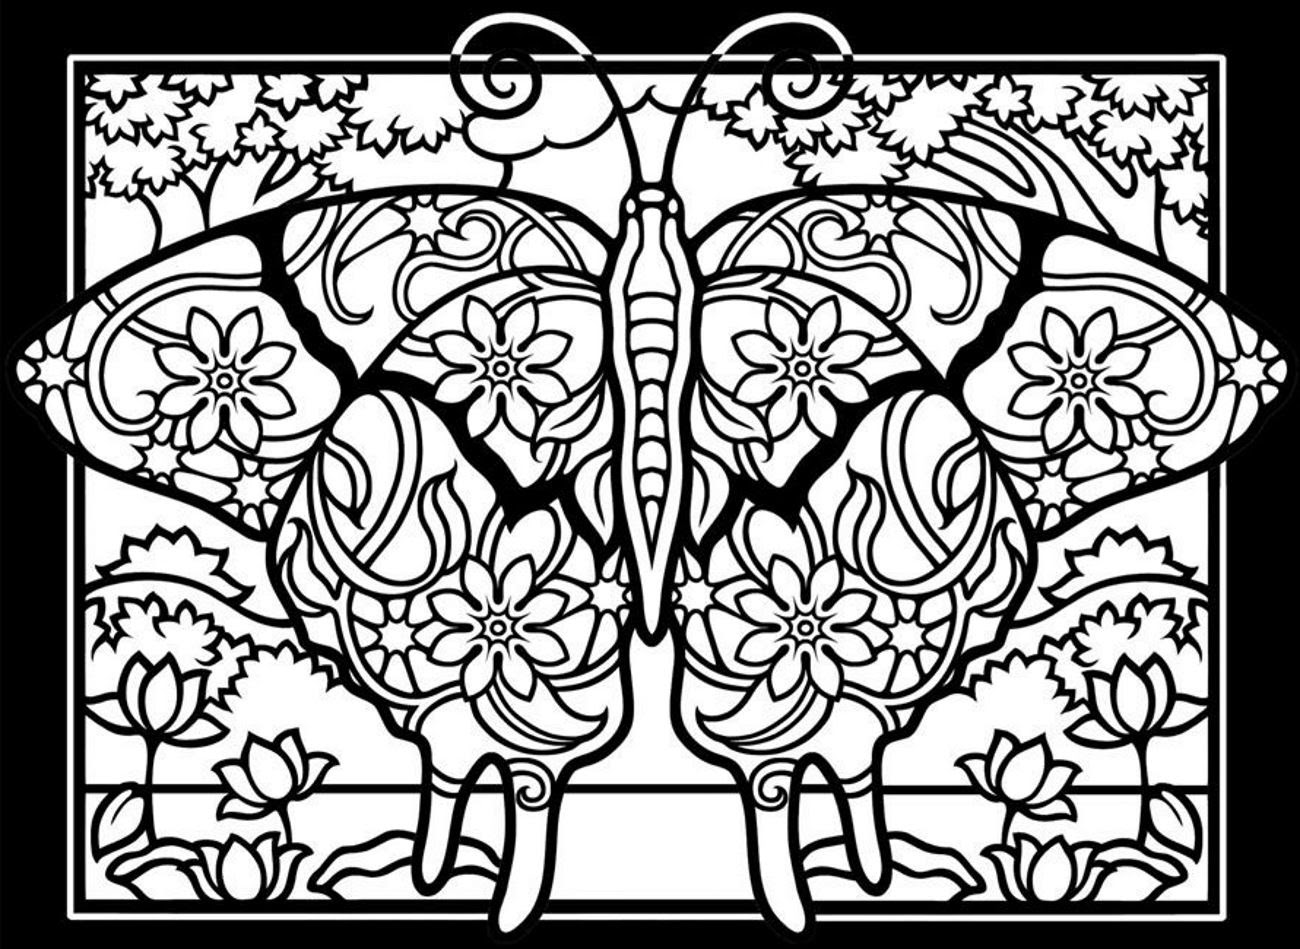 Download 63 EASY JUNGLE FLOWER COLORING PAGES PRINTABLE PDF - * Coloring